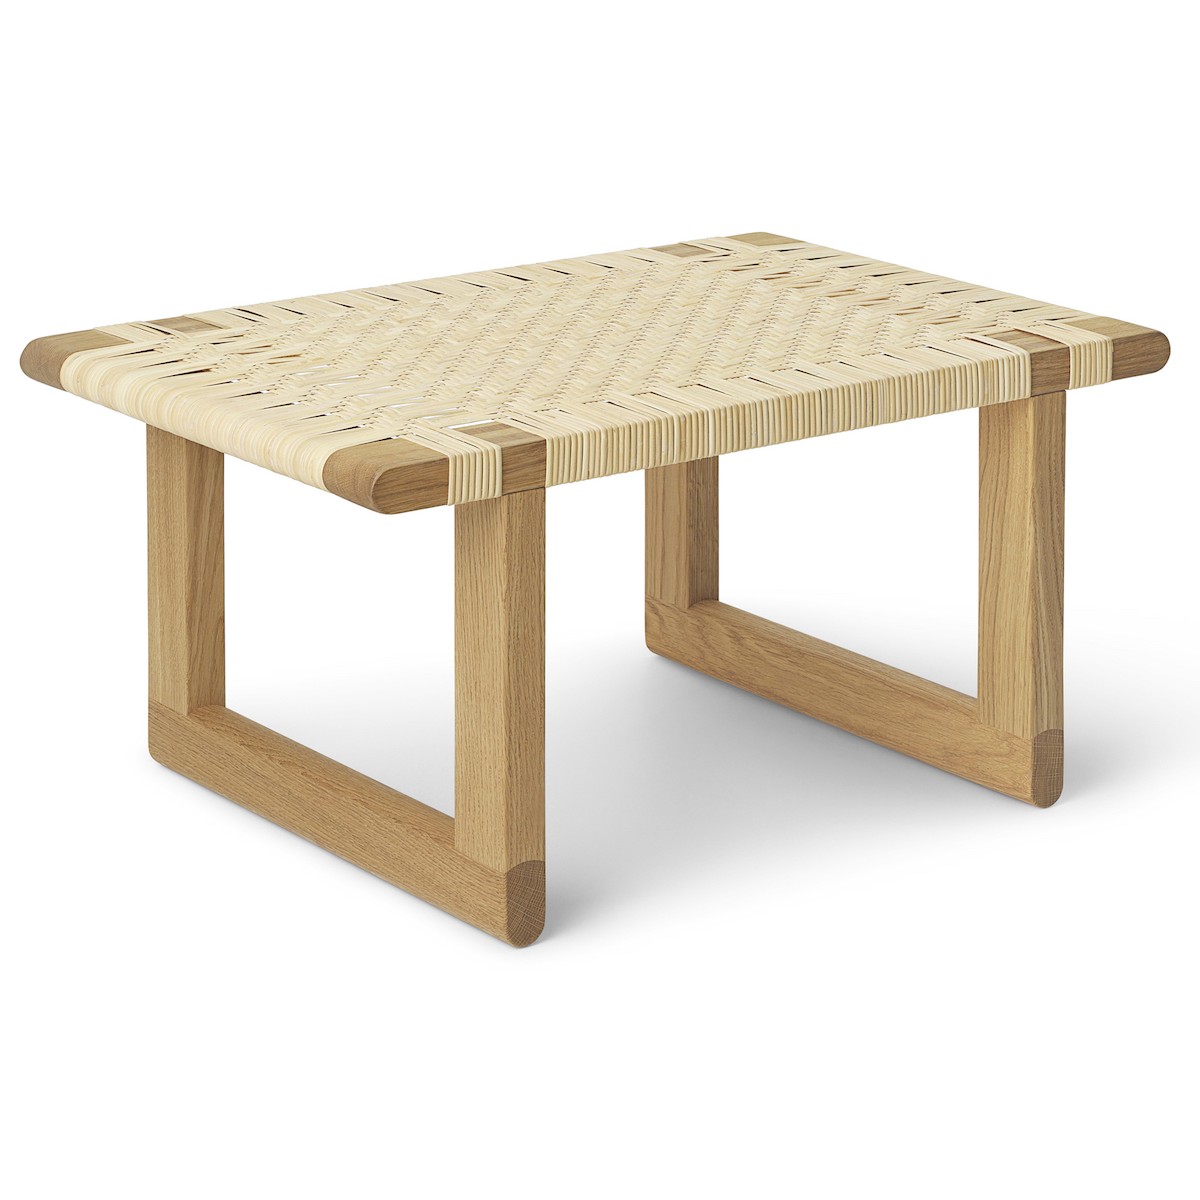 Table-Bench BM0488S – Cane Seat